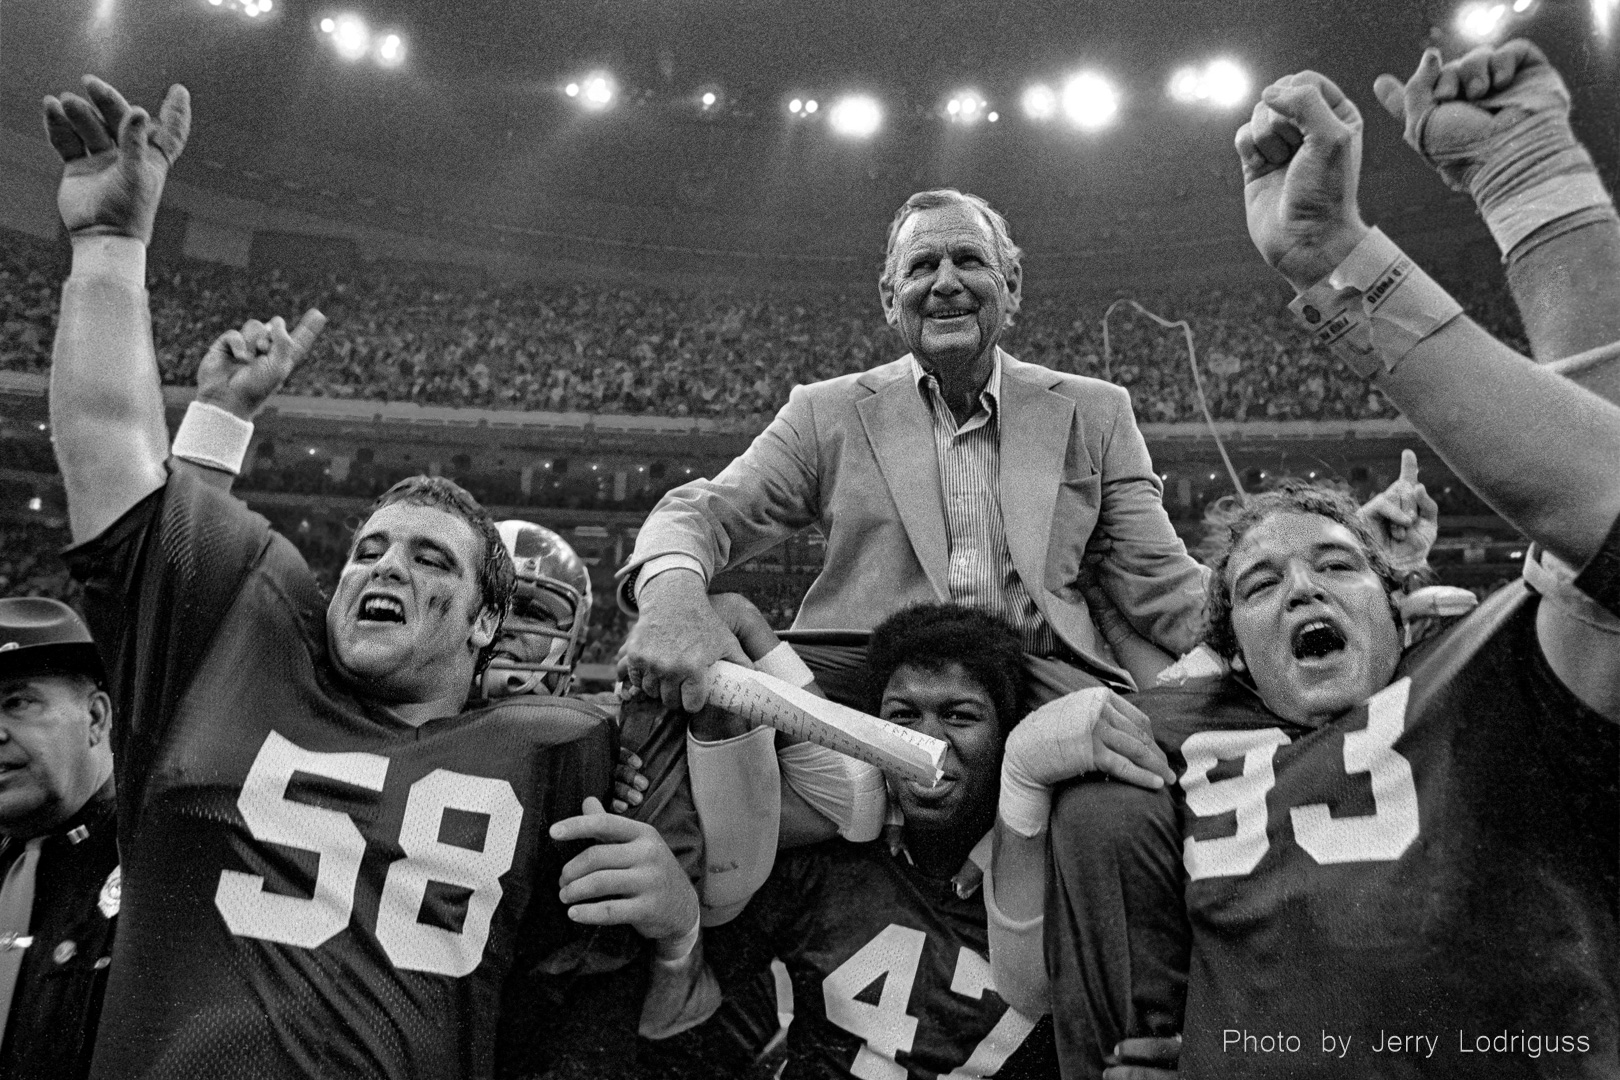 Alabama coach Bear Bryant is carried off the field by his players after beating Ohio State in the Sugar Bowl on January 2, 1978 to win the national championship in college football.